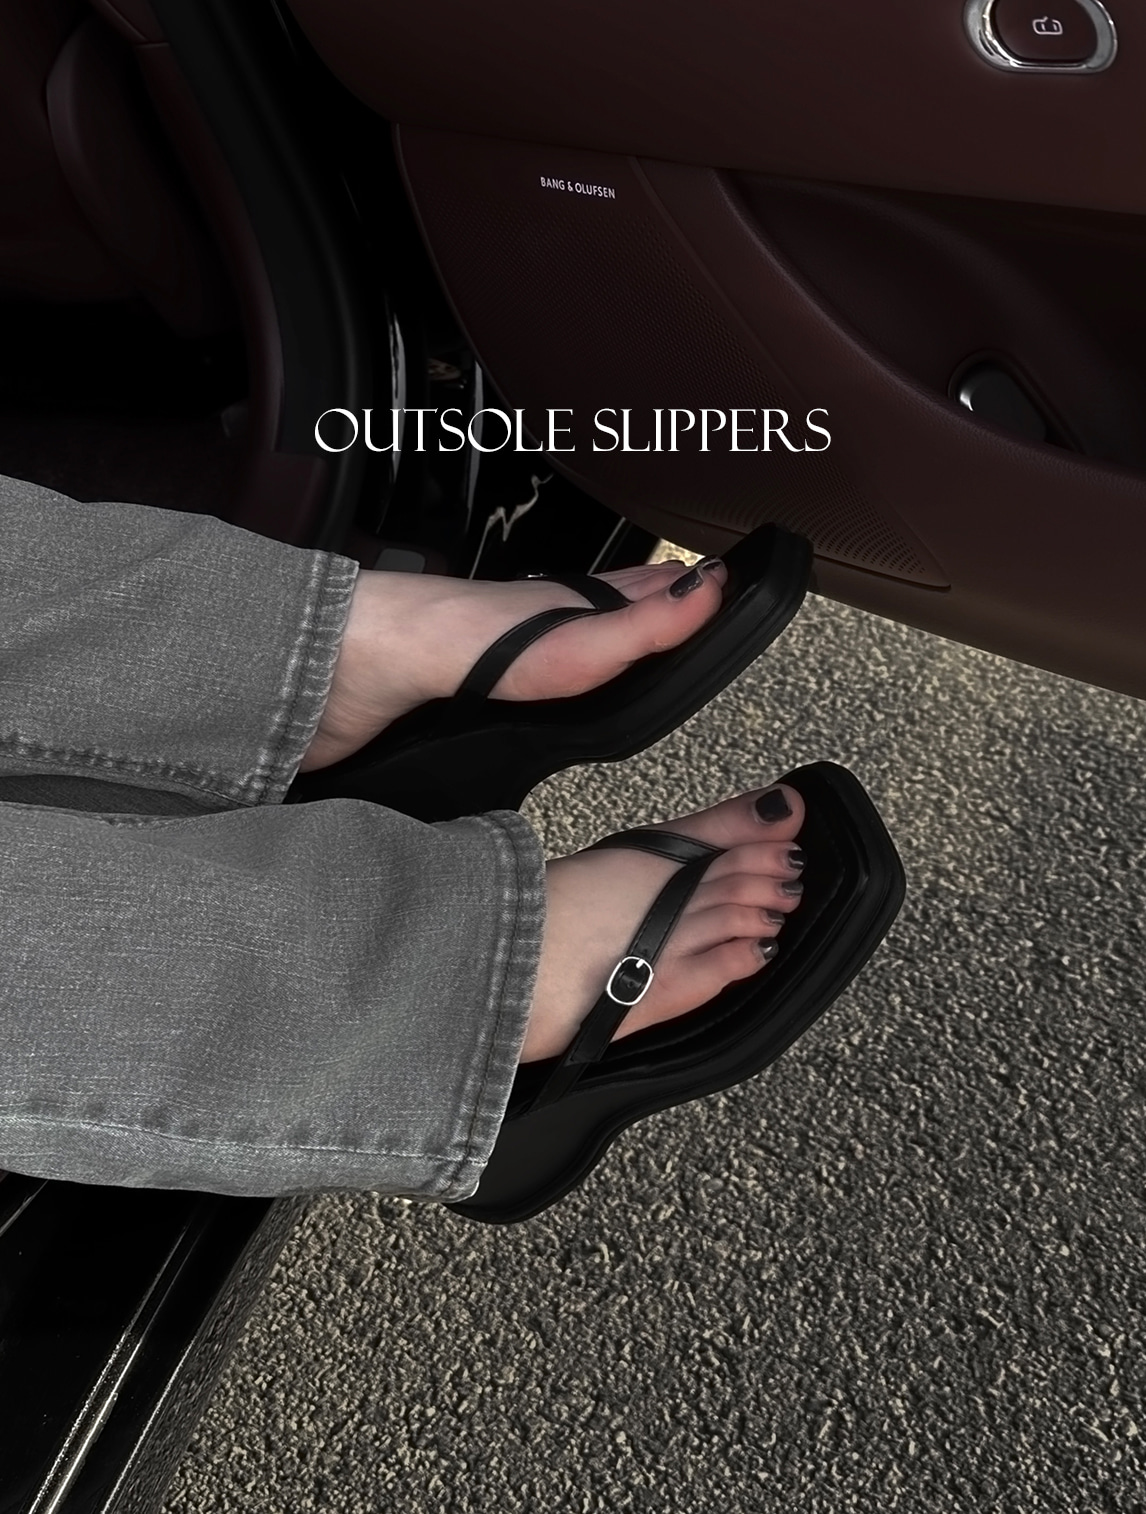 Outsole slippers